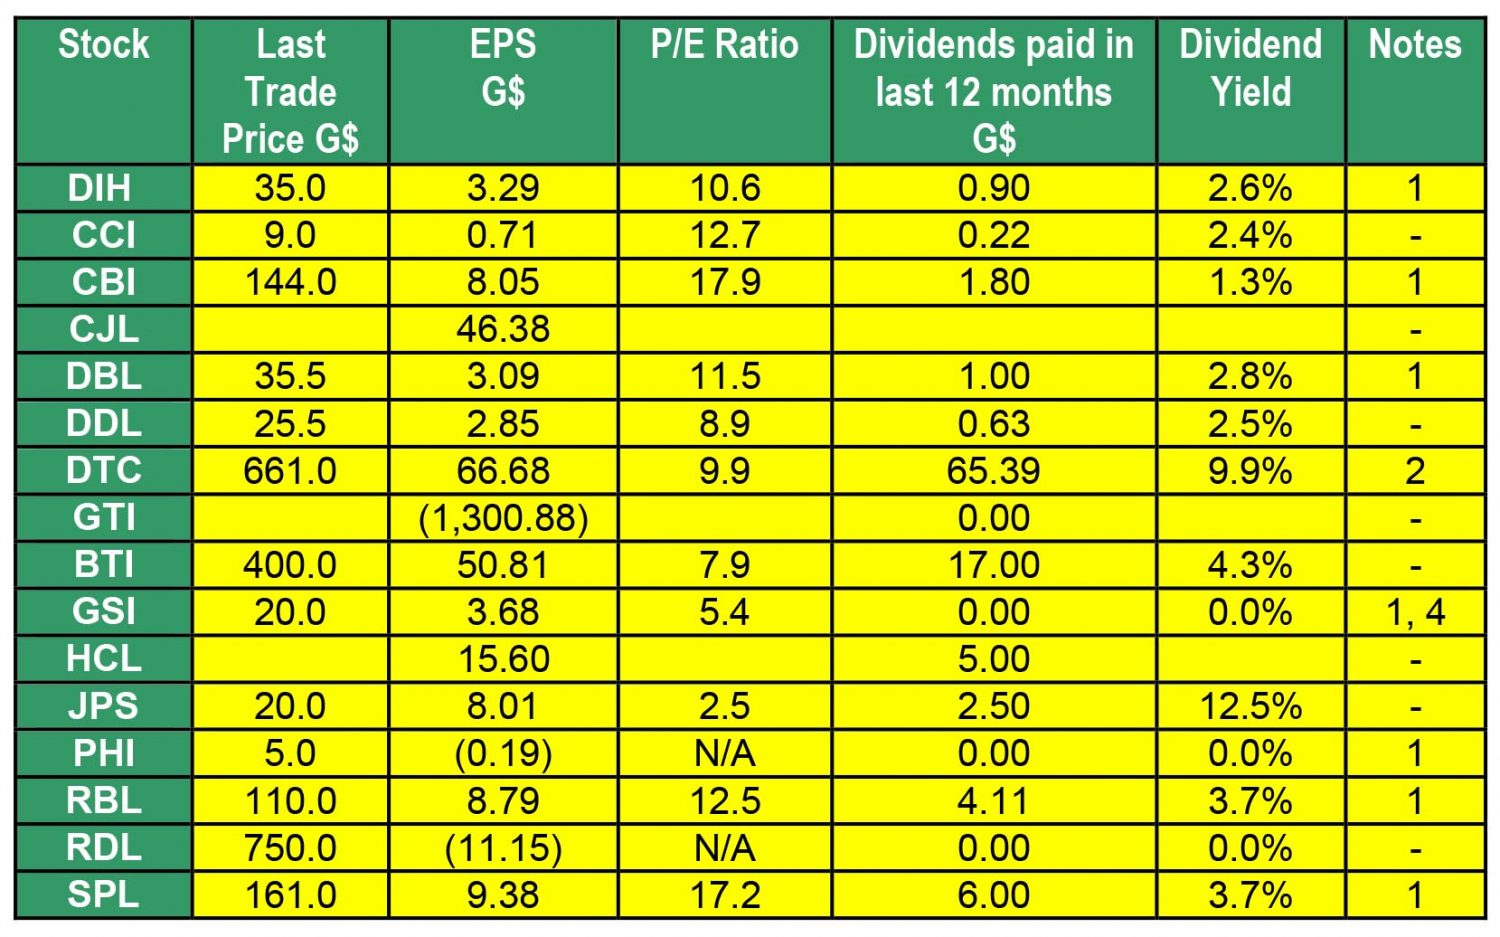 Notes
1 – Interim Results  
2 – Prospective Dividends
3 – Shows year-end EPS but Interim Dividend
4 – Shows Interim EPS but year-end Dividend
EPS: earnings per share for 12 months period to the date the latest financials have been prepared. These include:
2005 – Final results for GTI. 
2015 – Final results for CJL. 
2016 – Interim results for GSI and PHI.
2016 – Final Results for CCI, DDL, DTC, BTI, HCL, JPS and RDL.

2017 – Interim results for DIH, CBI, DBL, RBL and SPL.
As such, some of these EPS calculations are based on un-audited figures.
 P/E Ratio: Price/Earnings Ratio = Last Trade Price/EPS
Dividend yield = Dividends paid in the last 12 months/last trade price. 